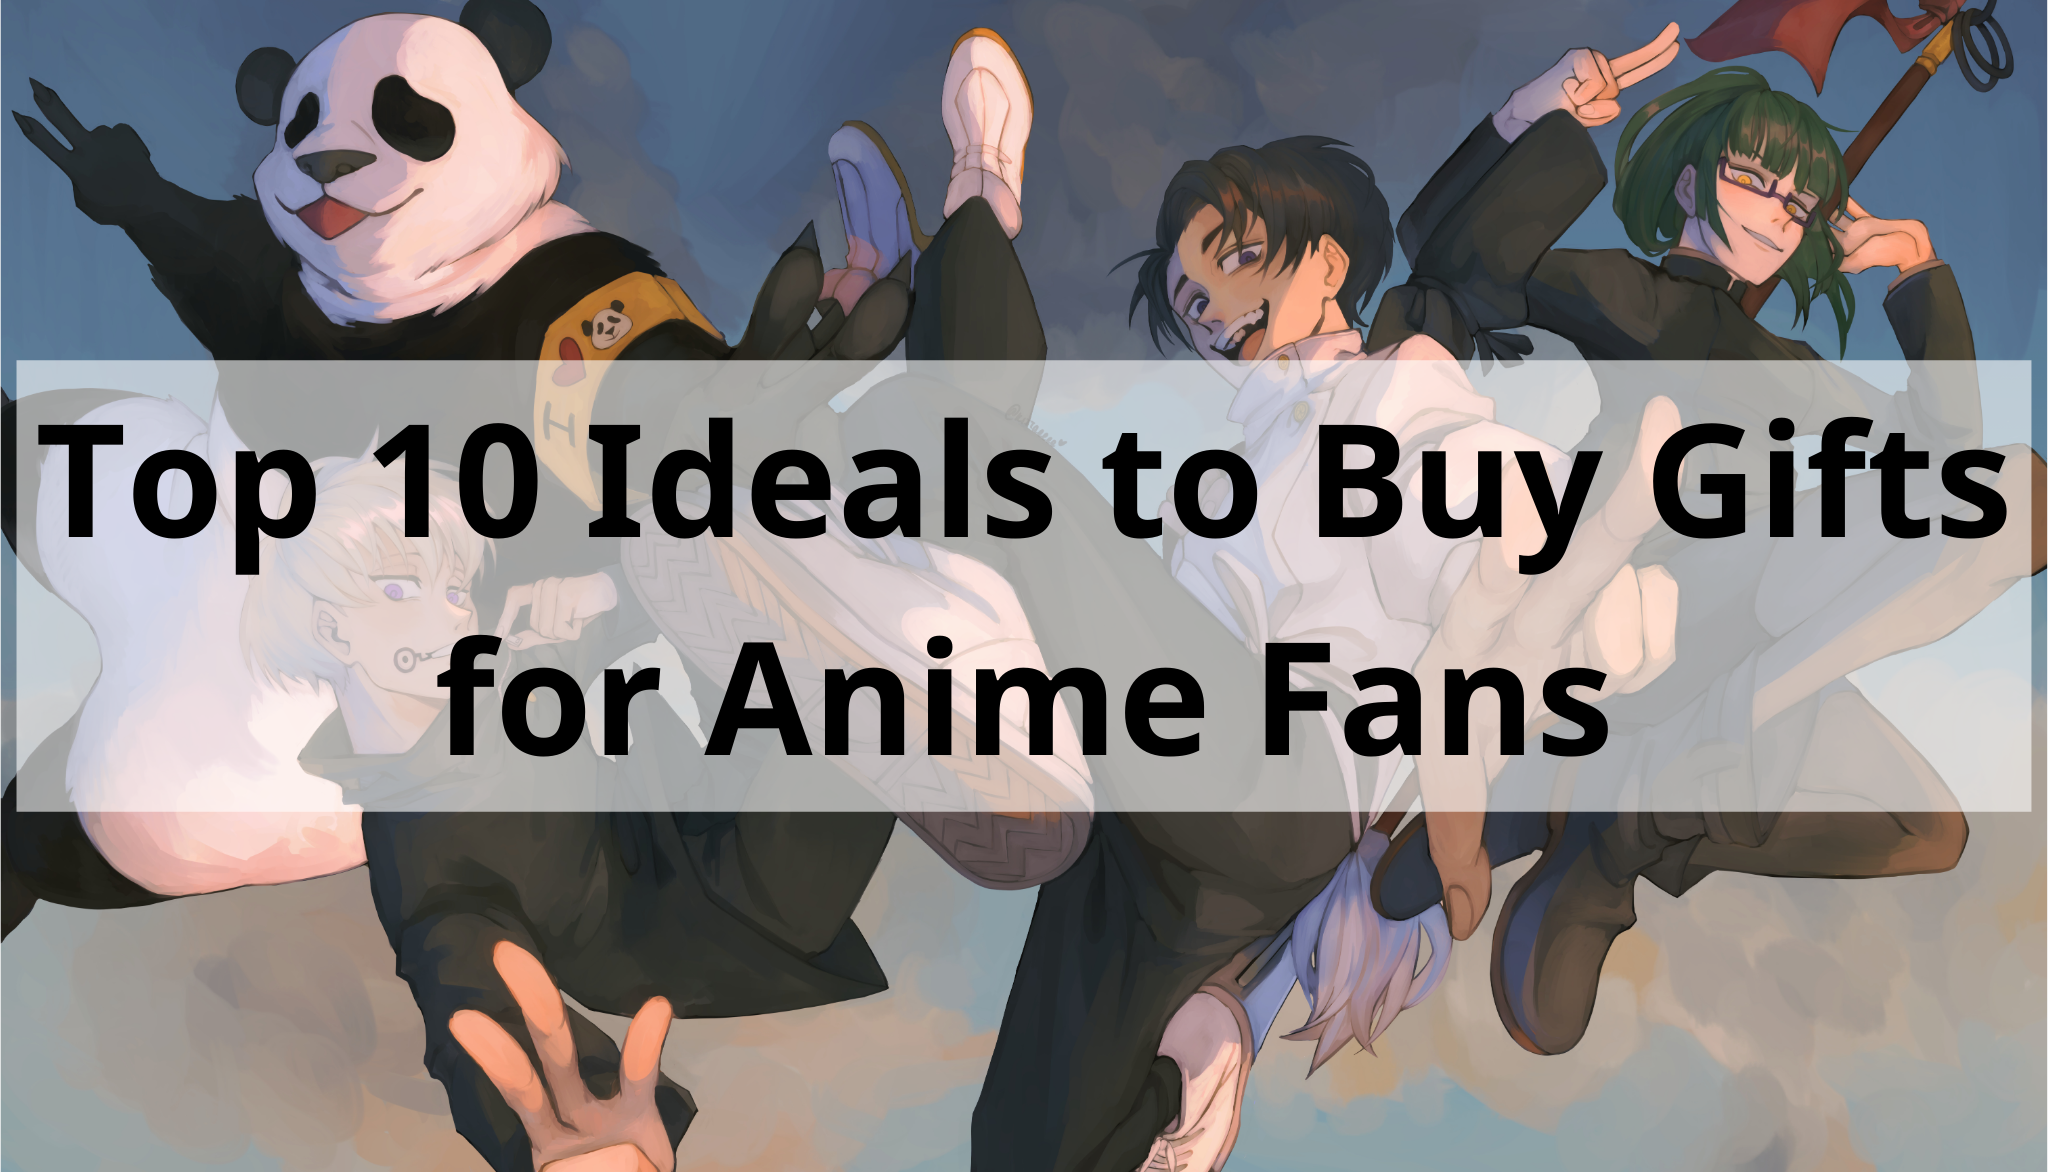 Amazing anime gift ideas for the anime lover in your life | Anime gifts, Anime  lovers, Cute boyfriend gifts